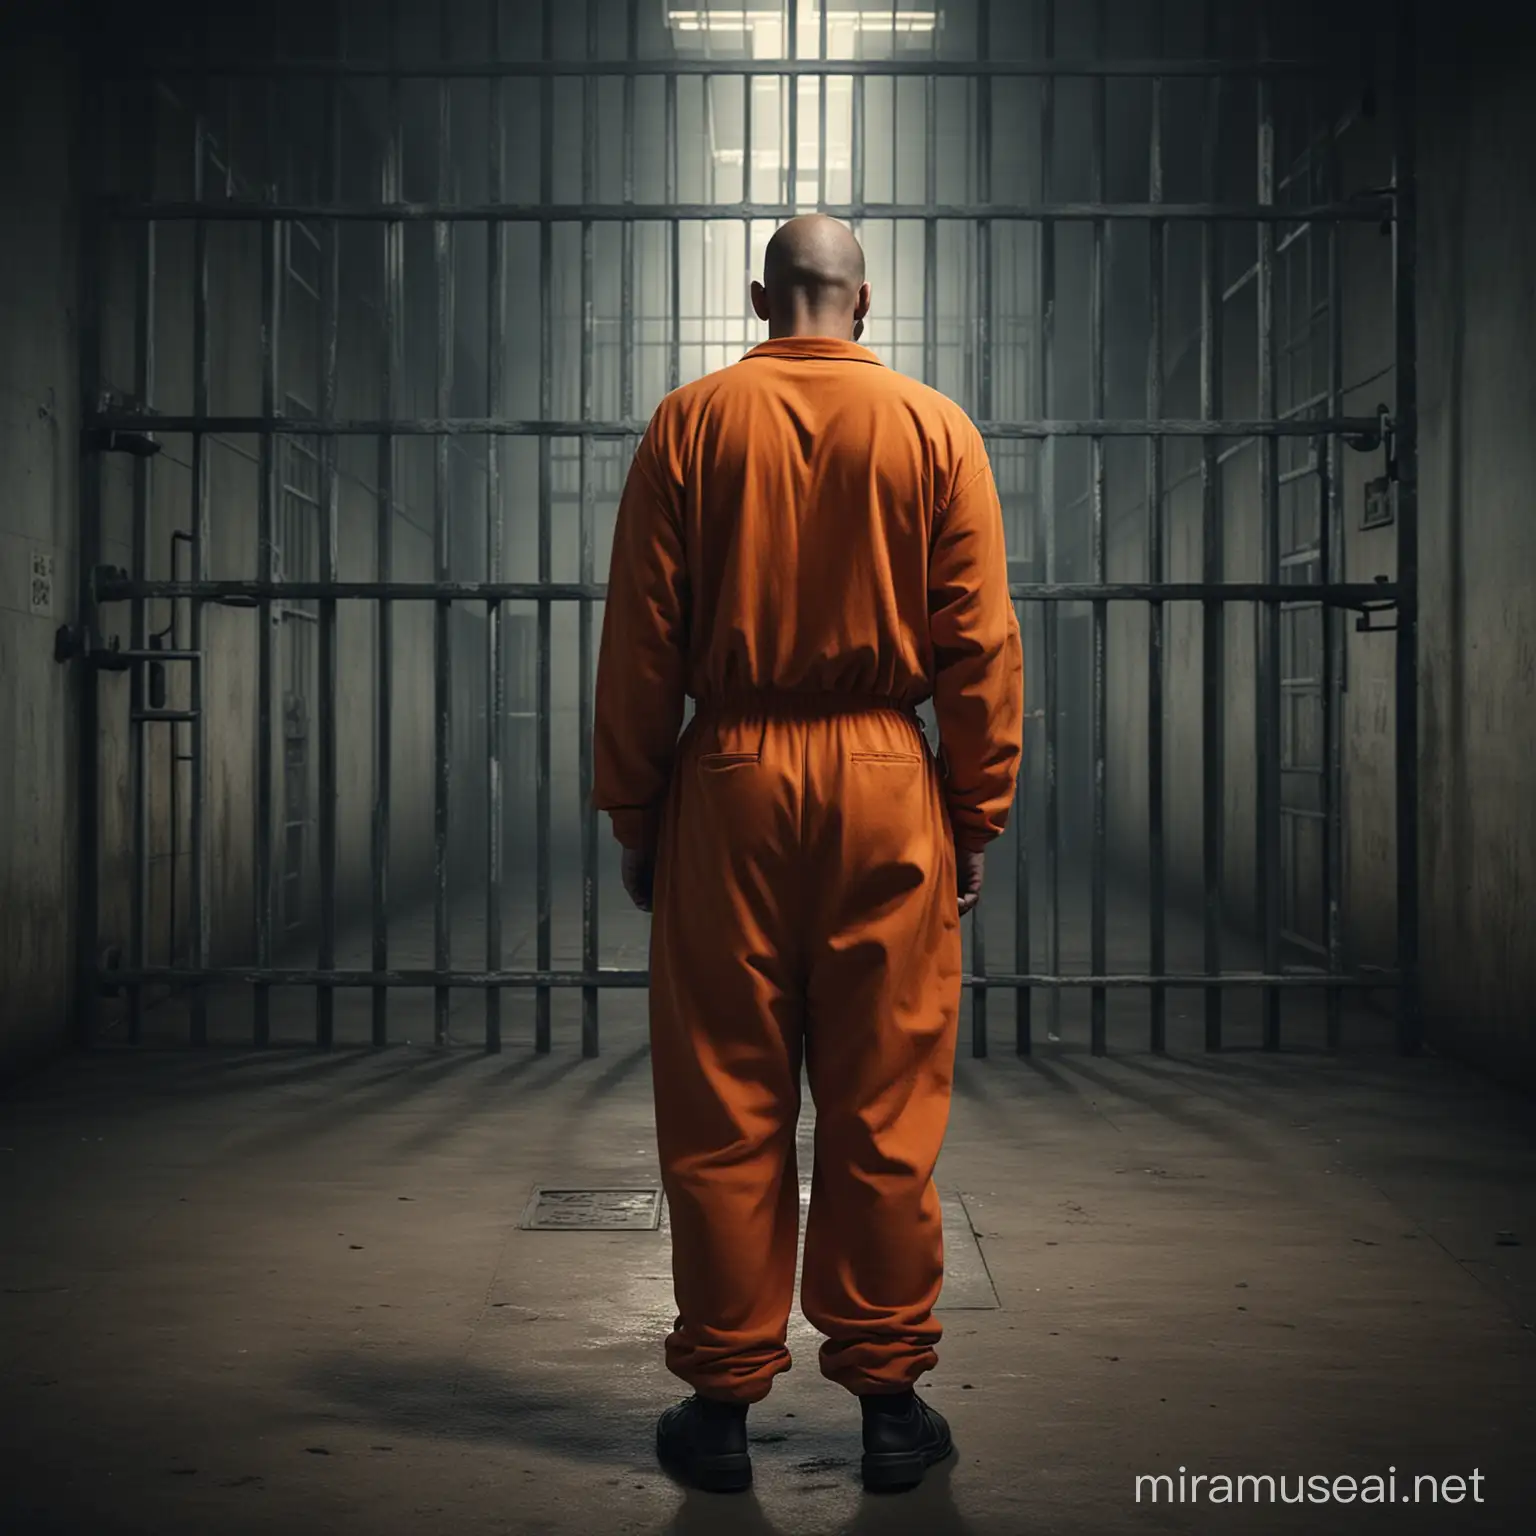 create an image of a prisoner from the back in jail, there is more foreground and background depth, long shot, Make it dark and have the prisoner wear an orange jumpsuit